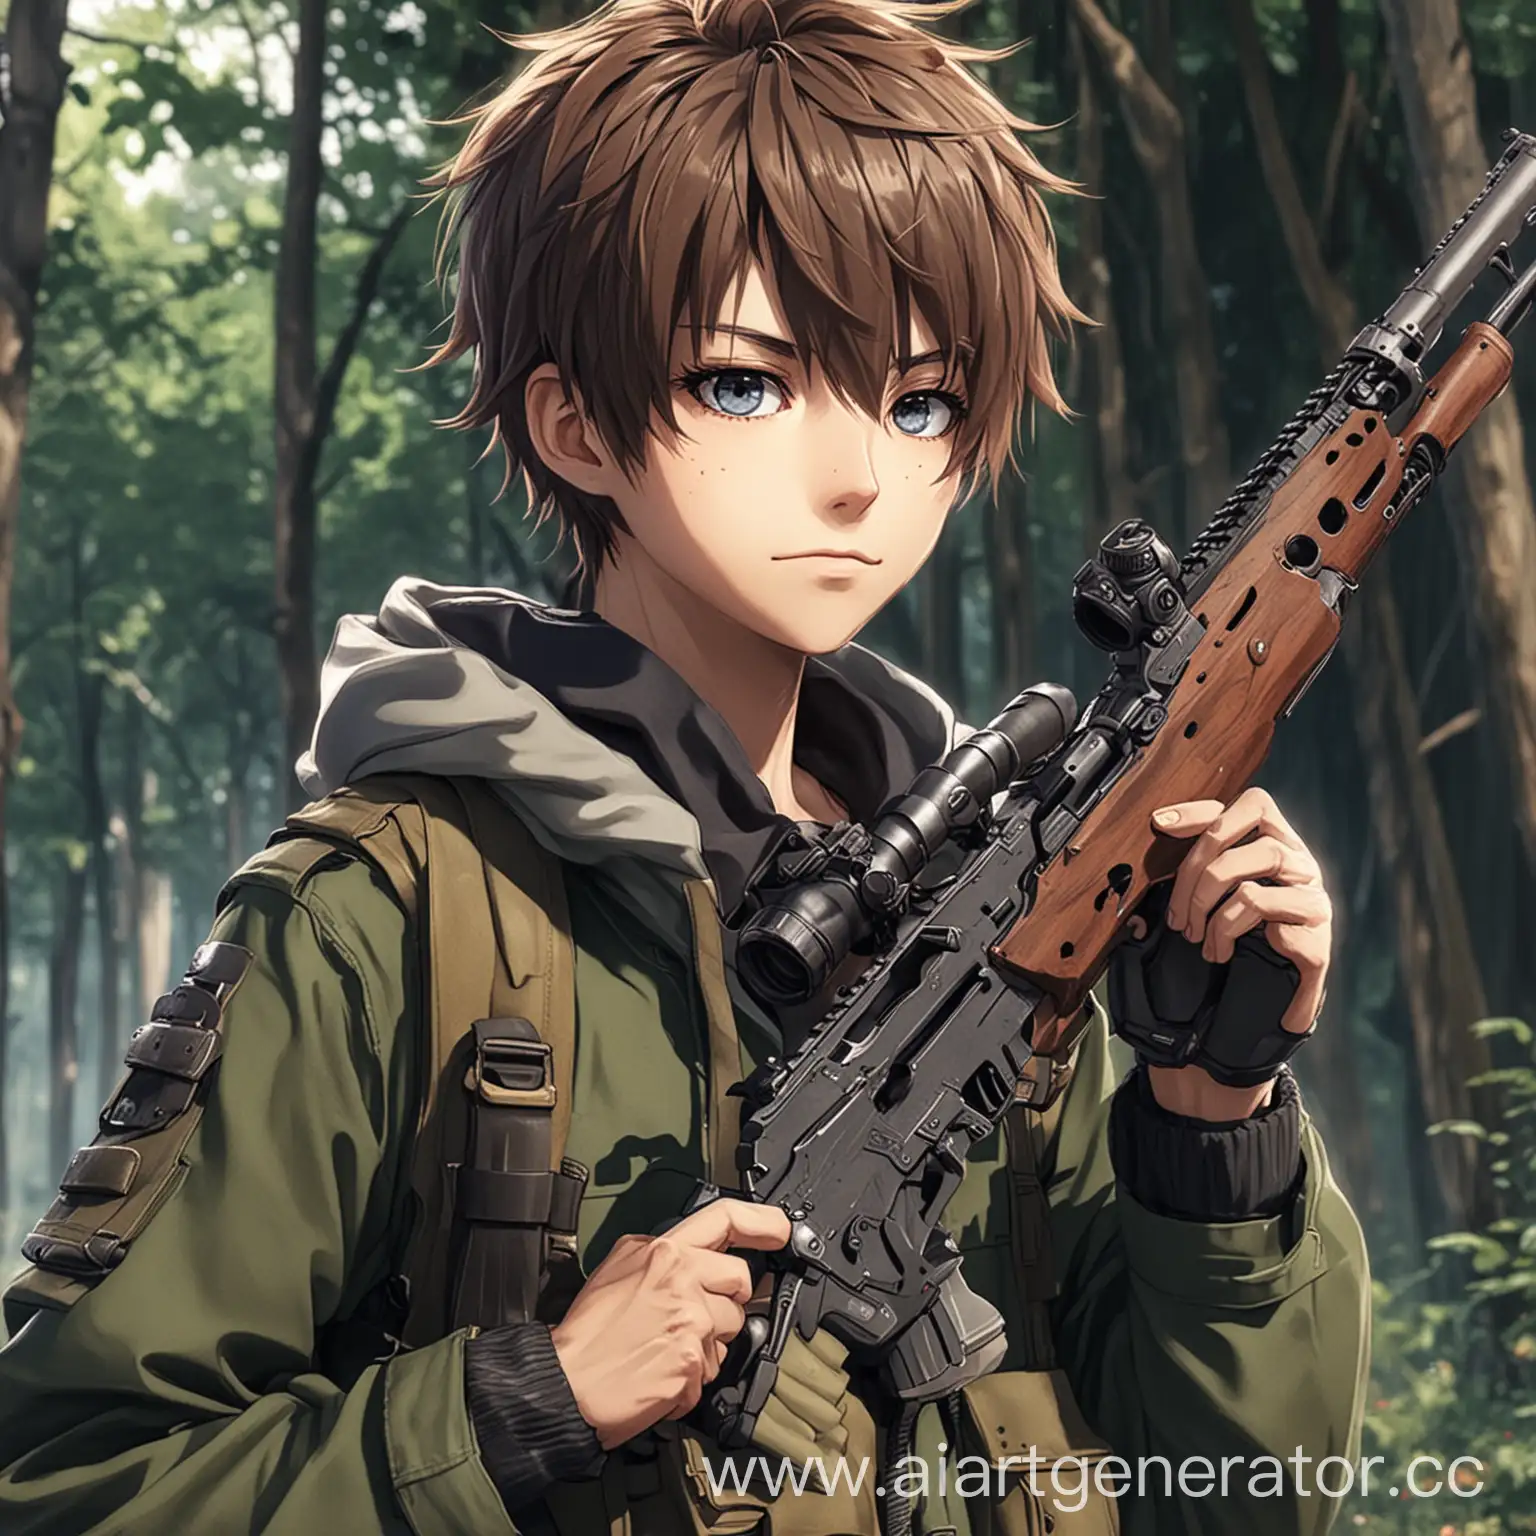 Anime-Boy-with-Rifle-in-Action-Pose